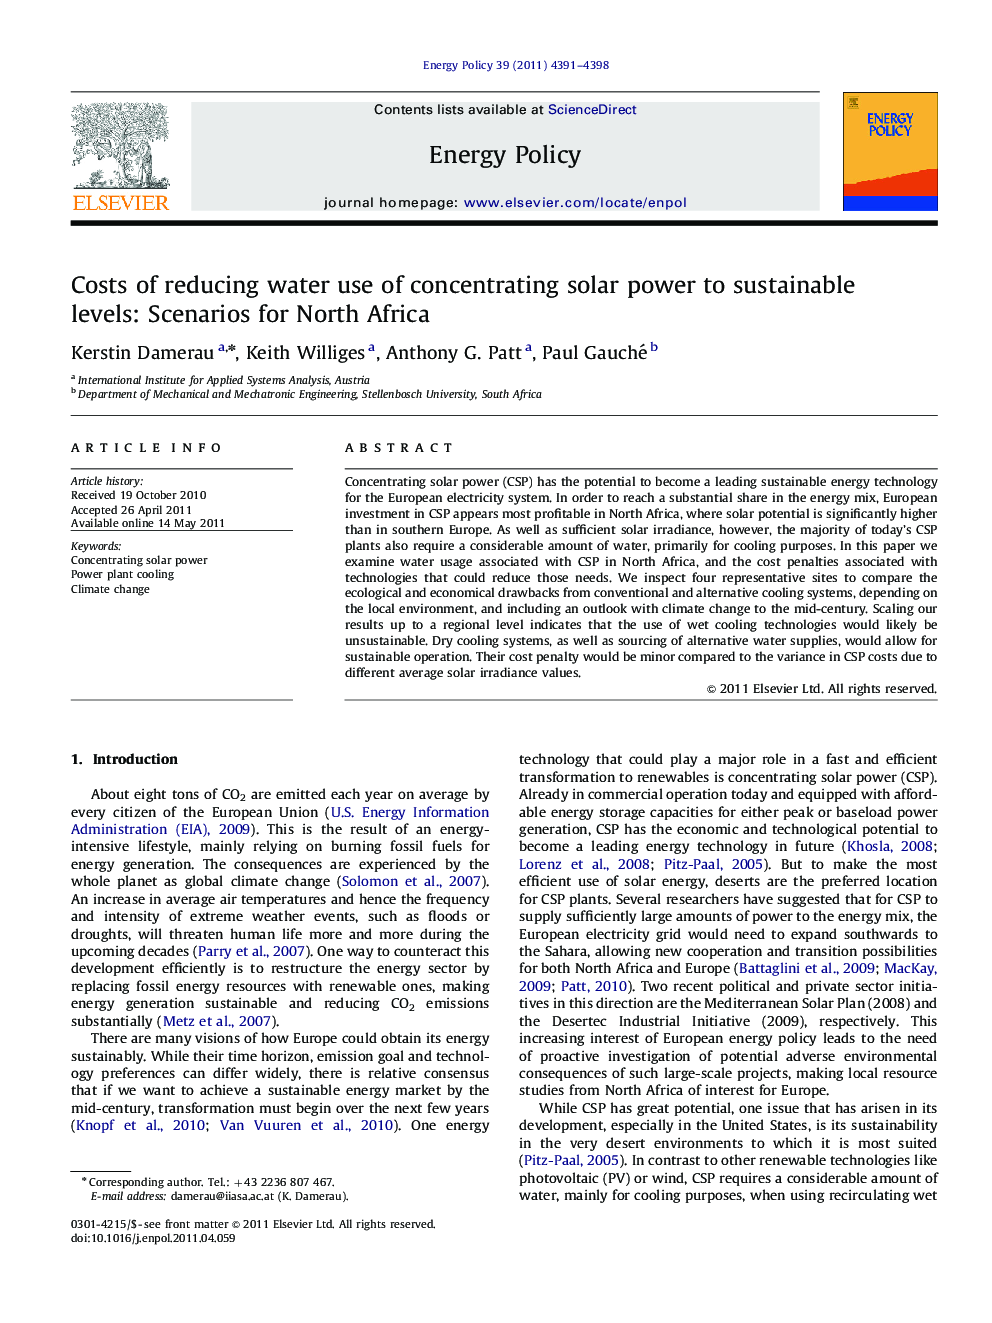 Costs of reducing water use of concentrating solar power to sustainable levels: Scenarios for North Africa